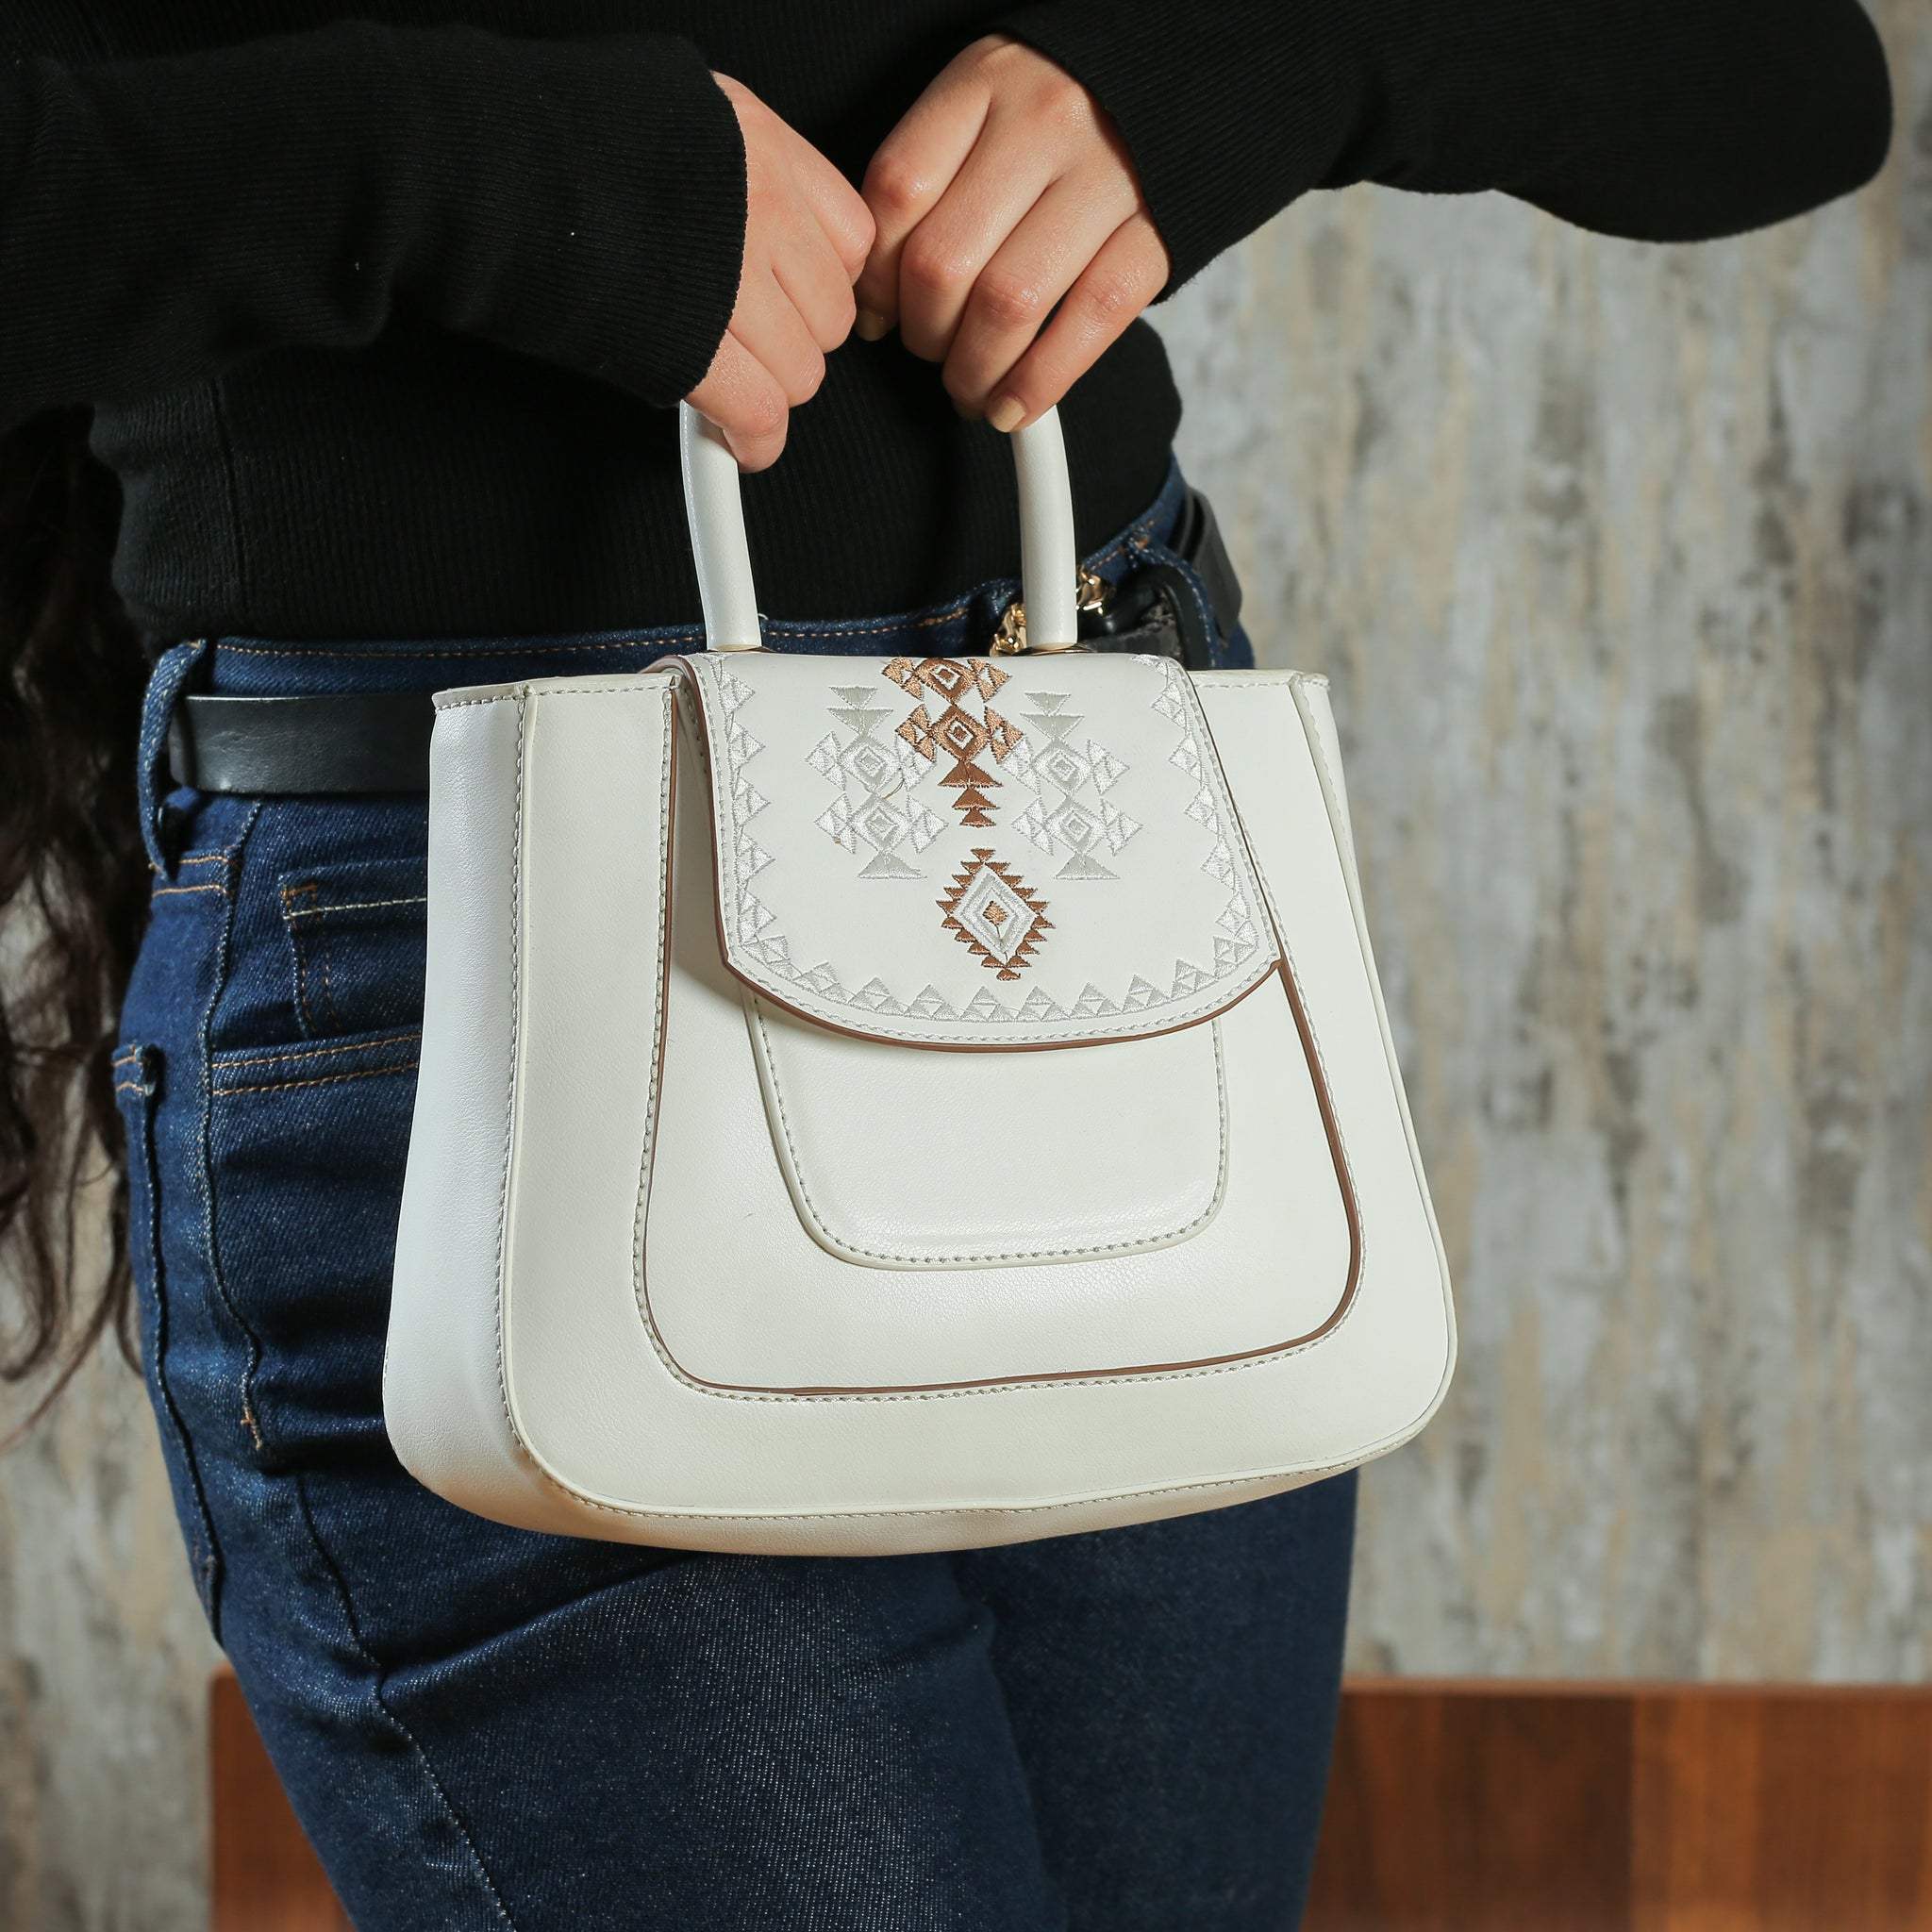 white leather bag with Geometric shapes